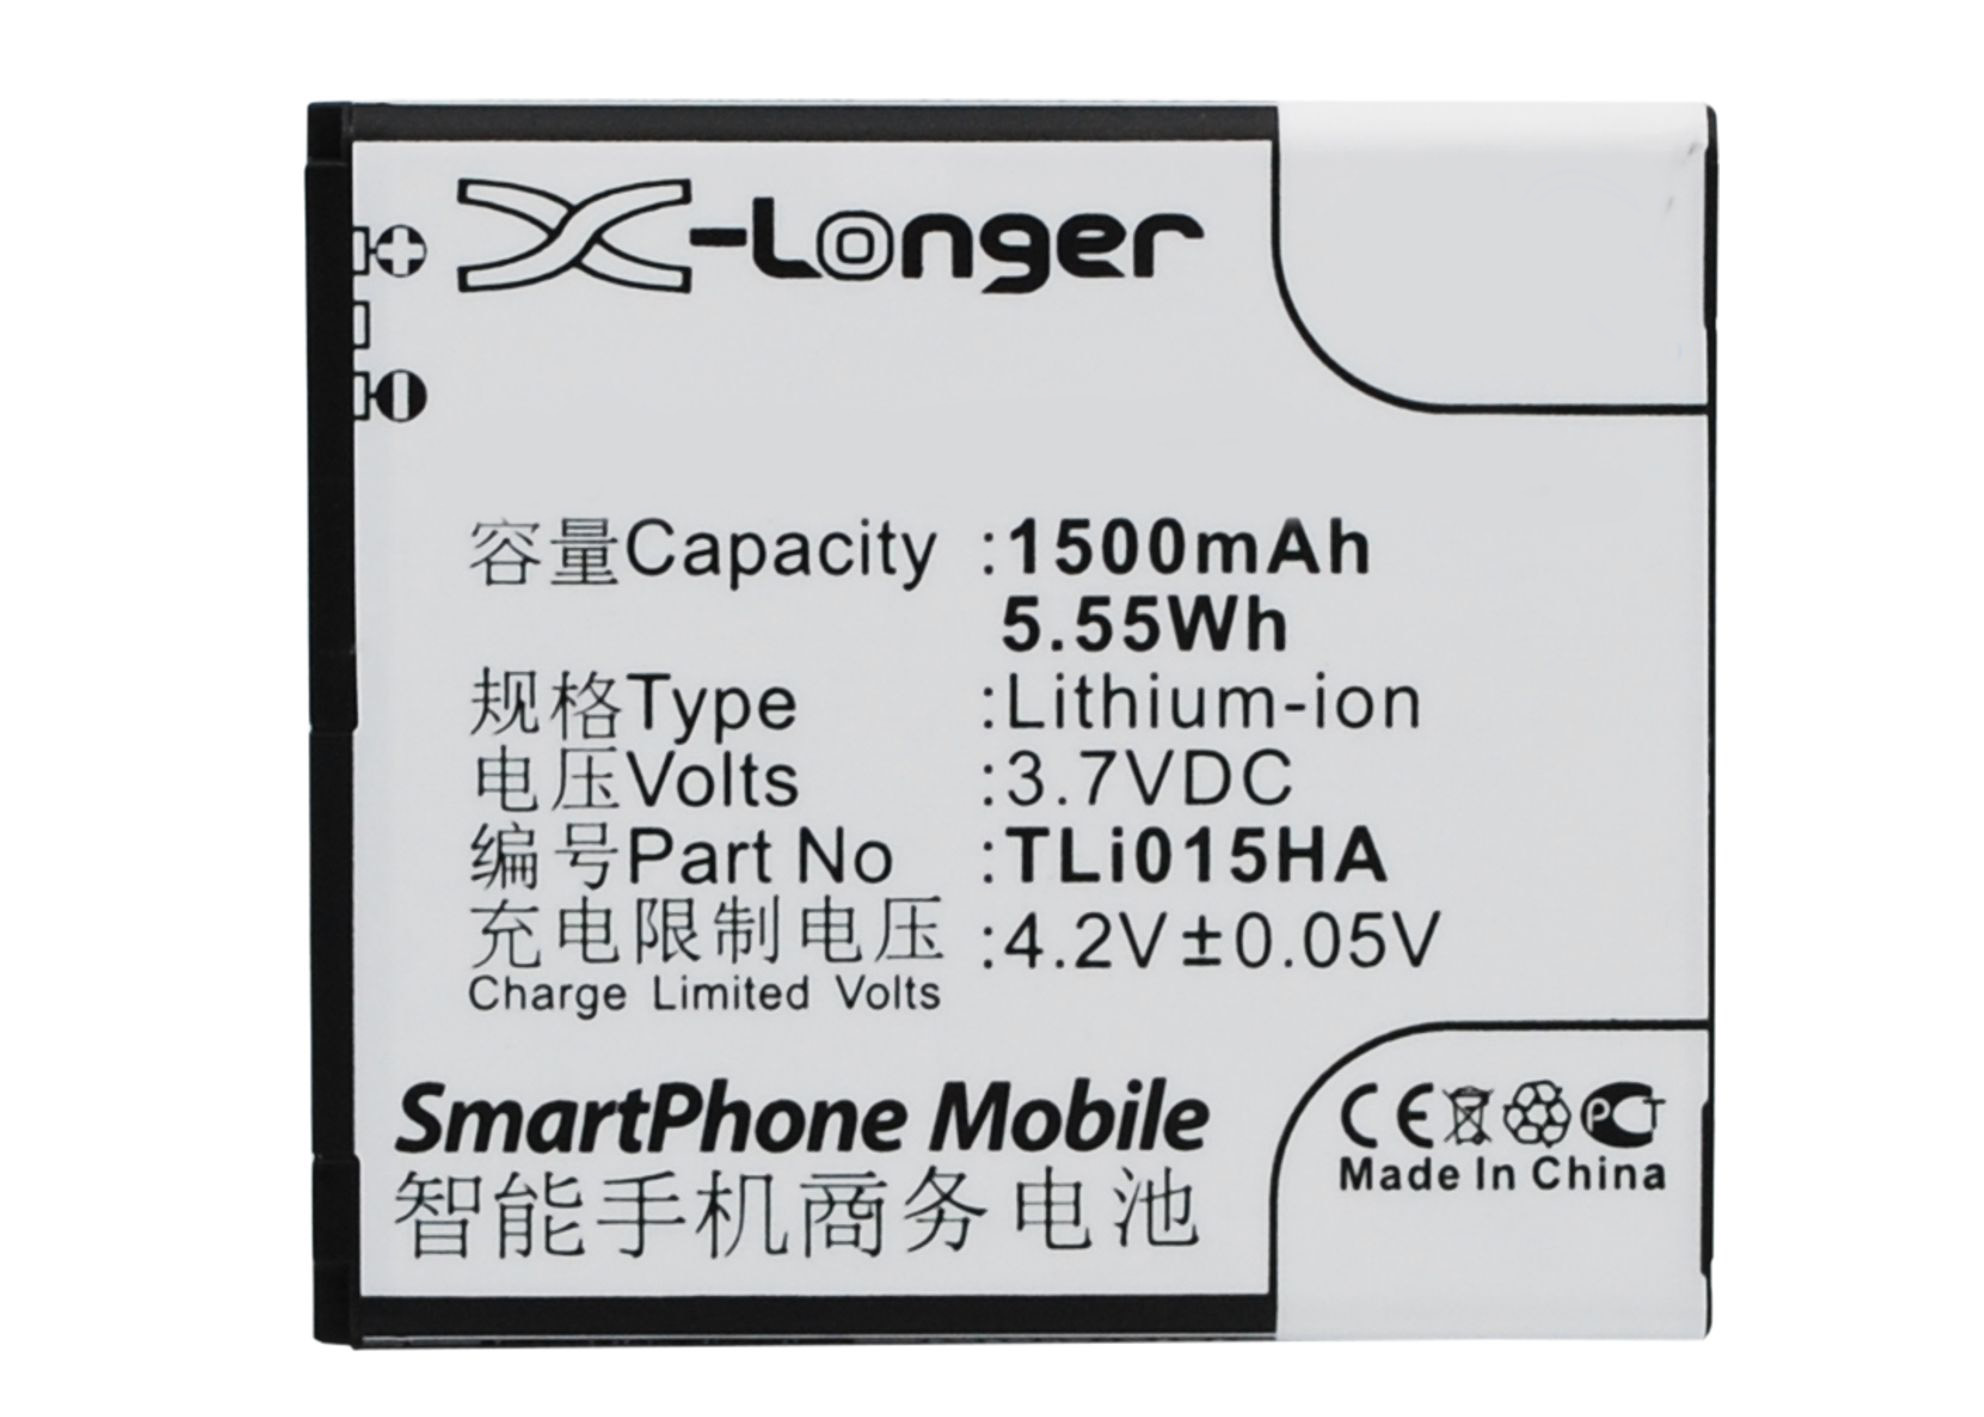 Synergy Digital Battery Compatible With TCL TLi015HA Cellphone Battery - (Li-Ion, 3.7V, 1500 mAh / 5.55Wh)